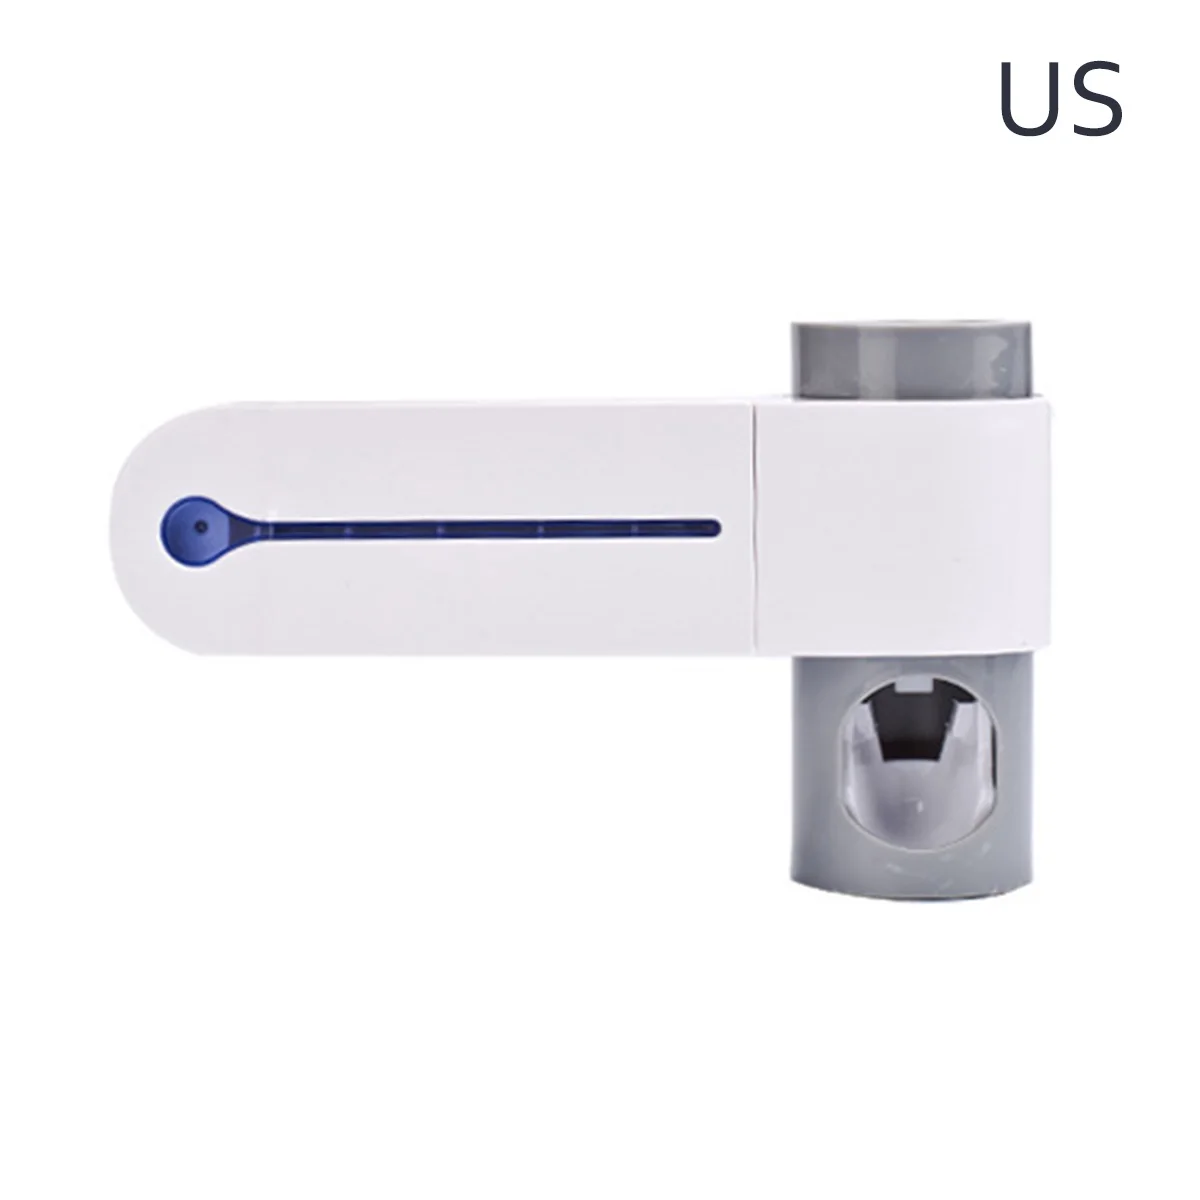 

brand new 2in1 toothbrush holder wall mounted toothpaste dispenser with 5 UV toothbrush sterilizer slots for kids and adult